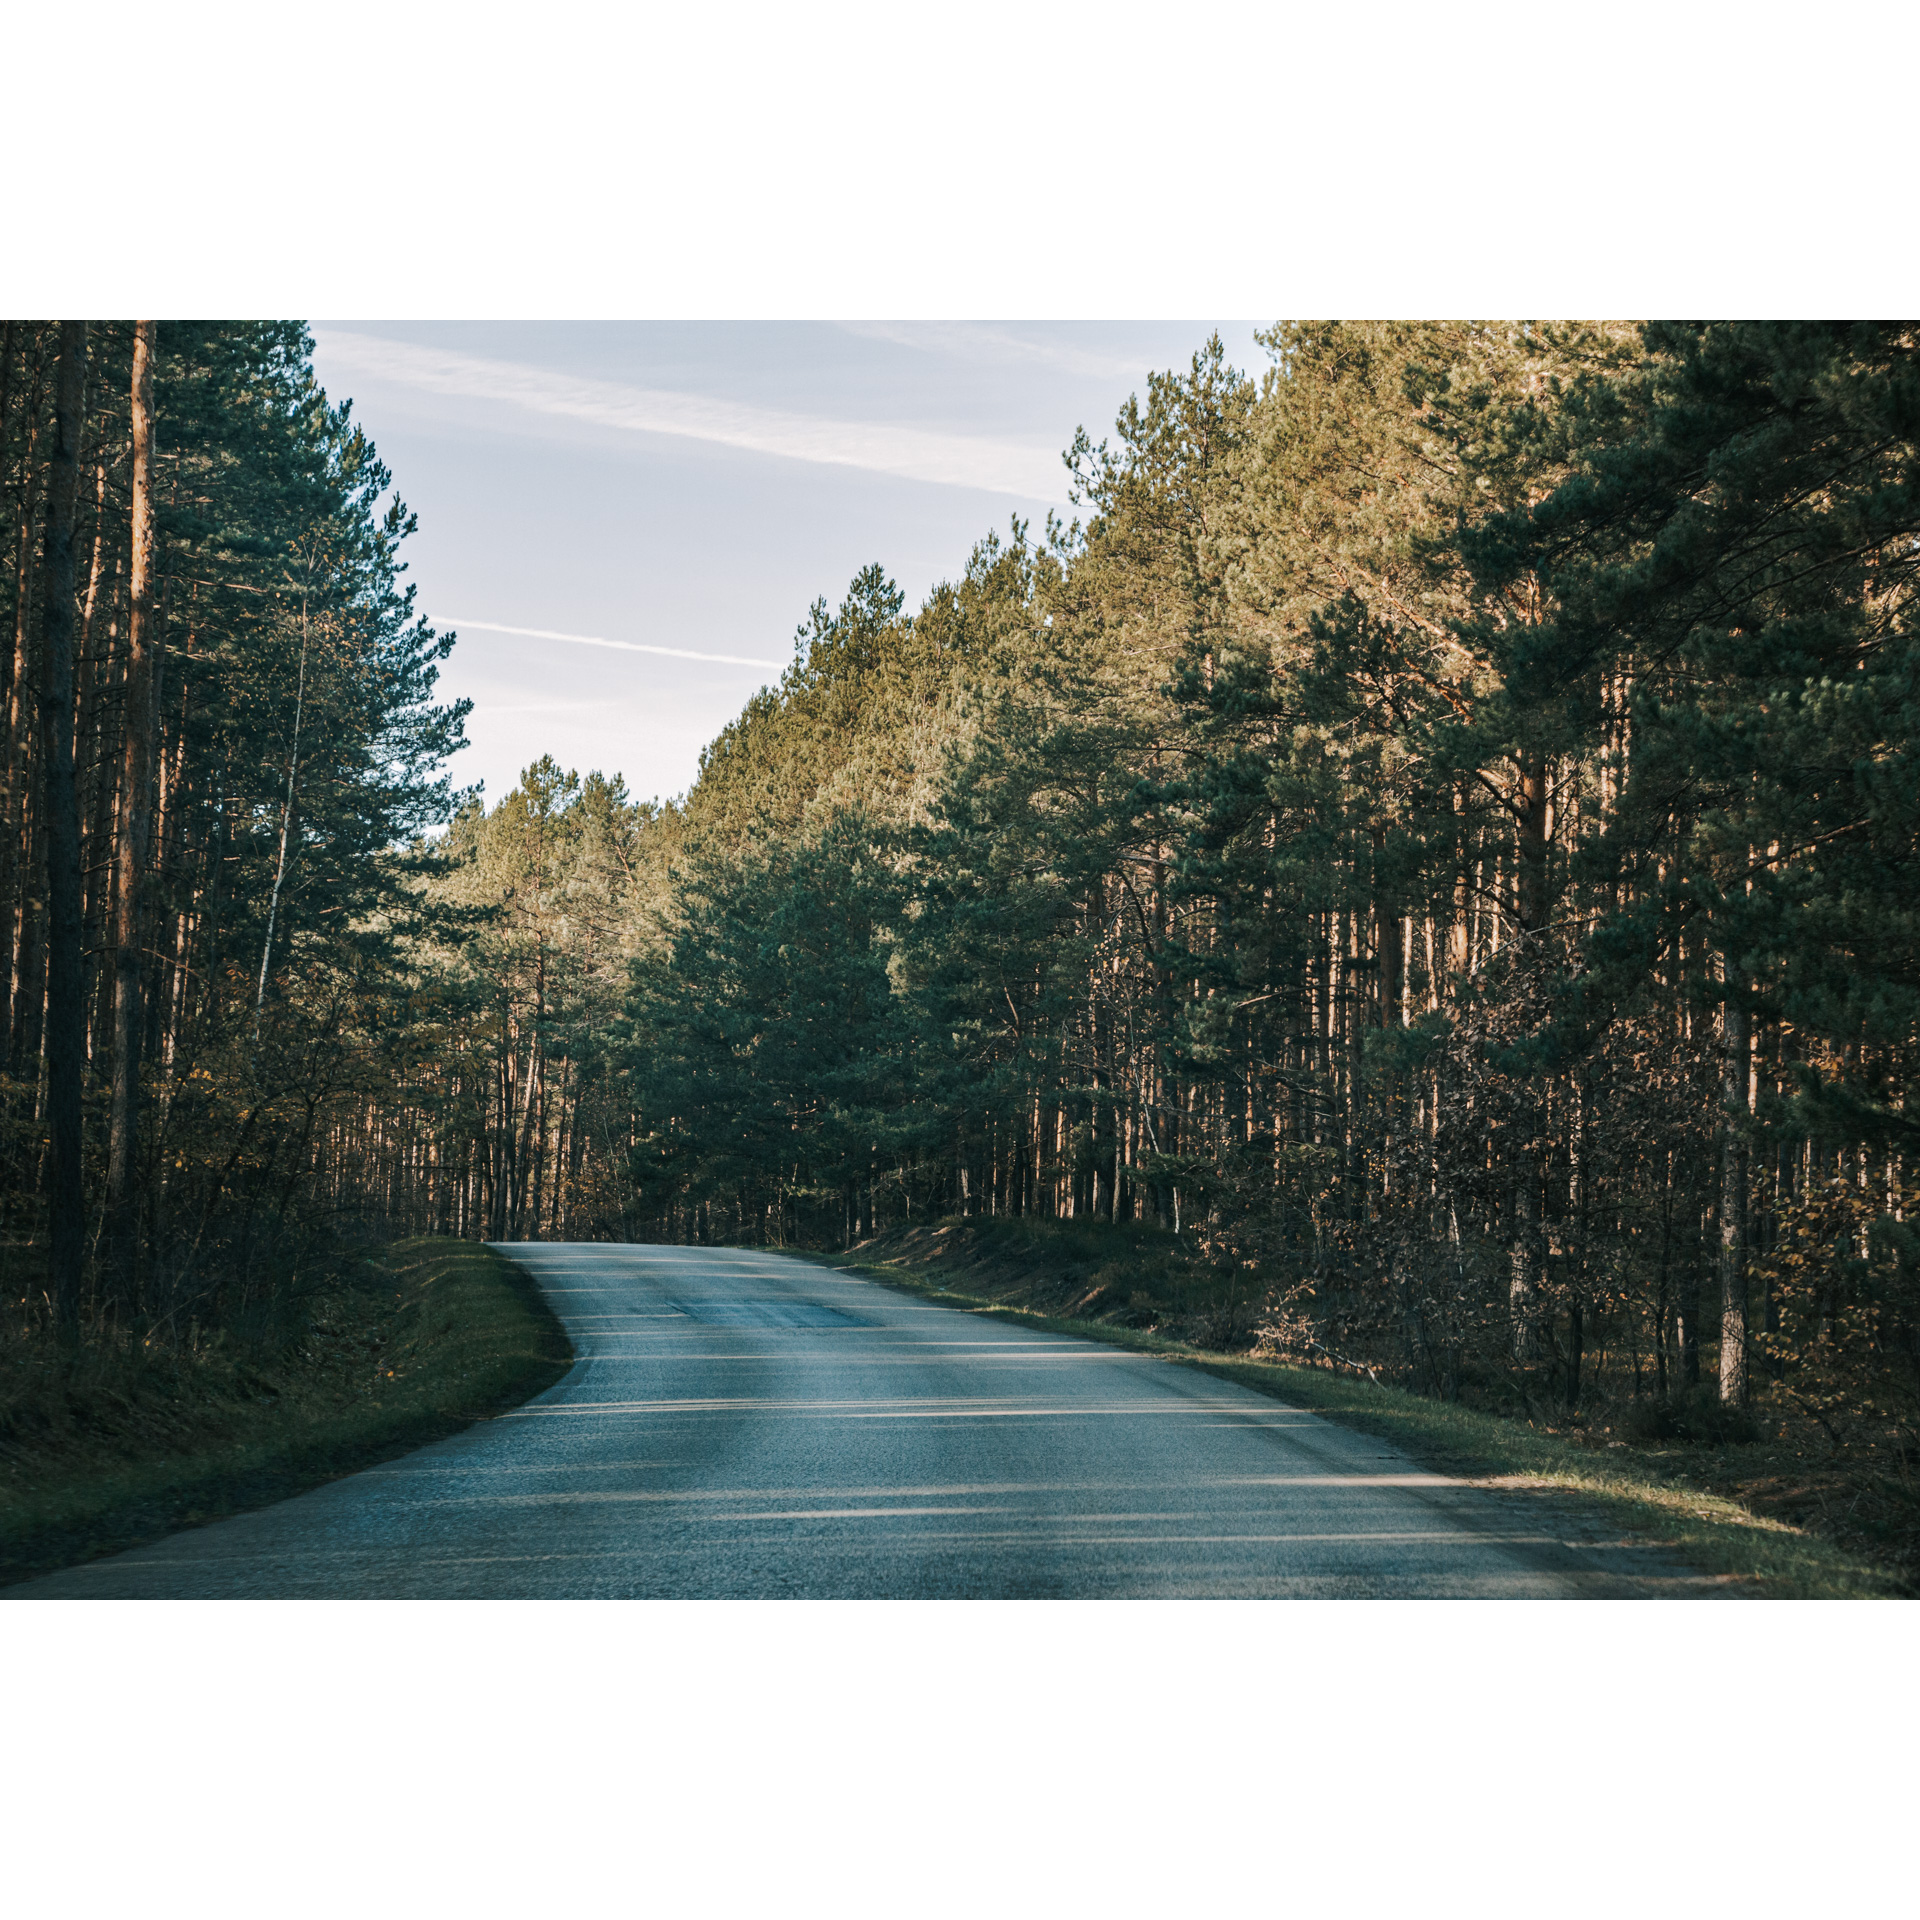 Forest asphalt road turning left among tall coniferous trees